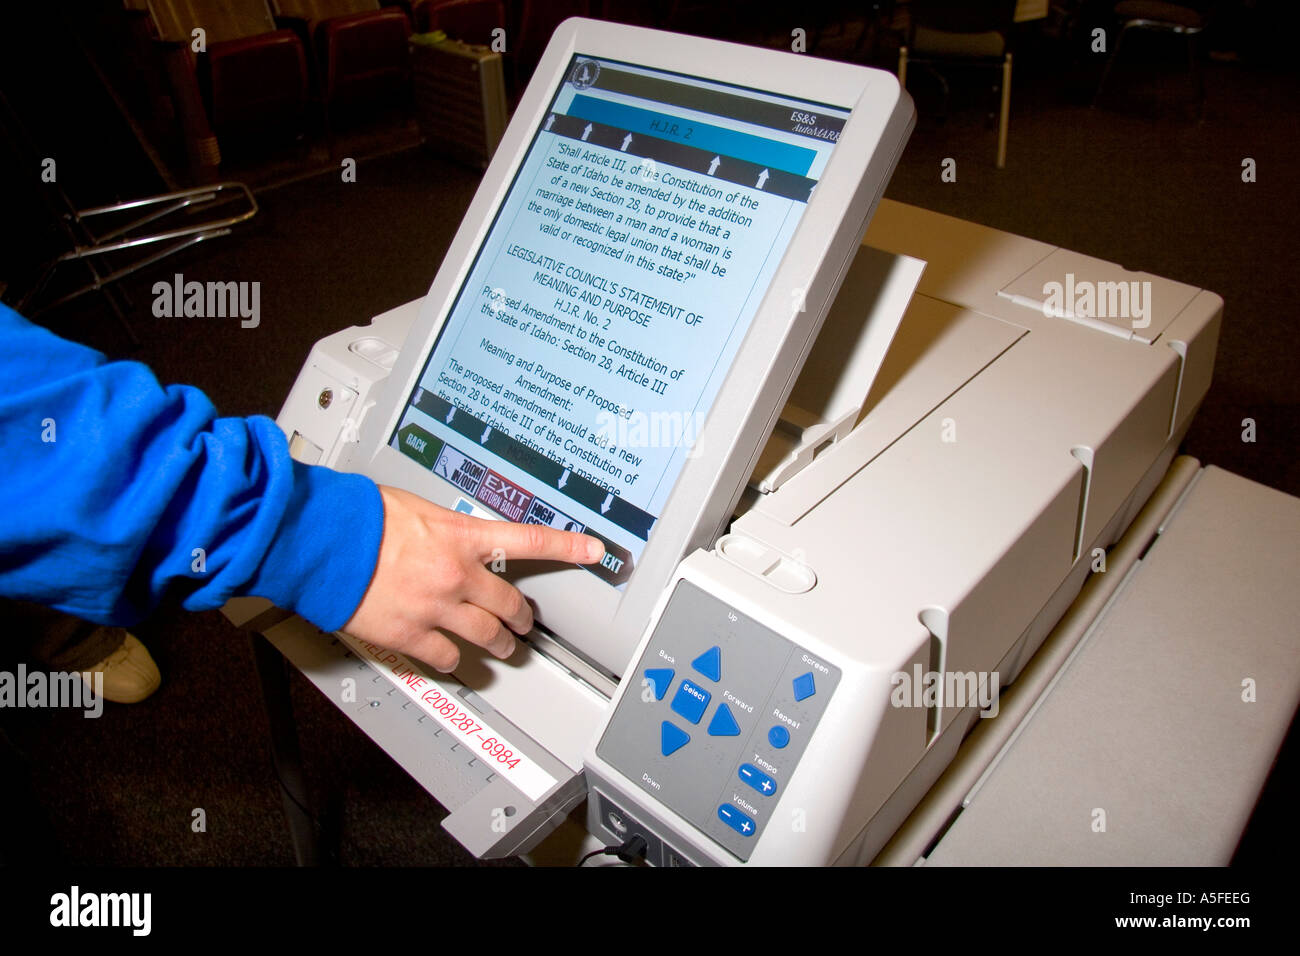 Touch screen voting computers being used in Boise Idaho Stock Photo